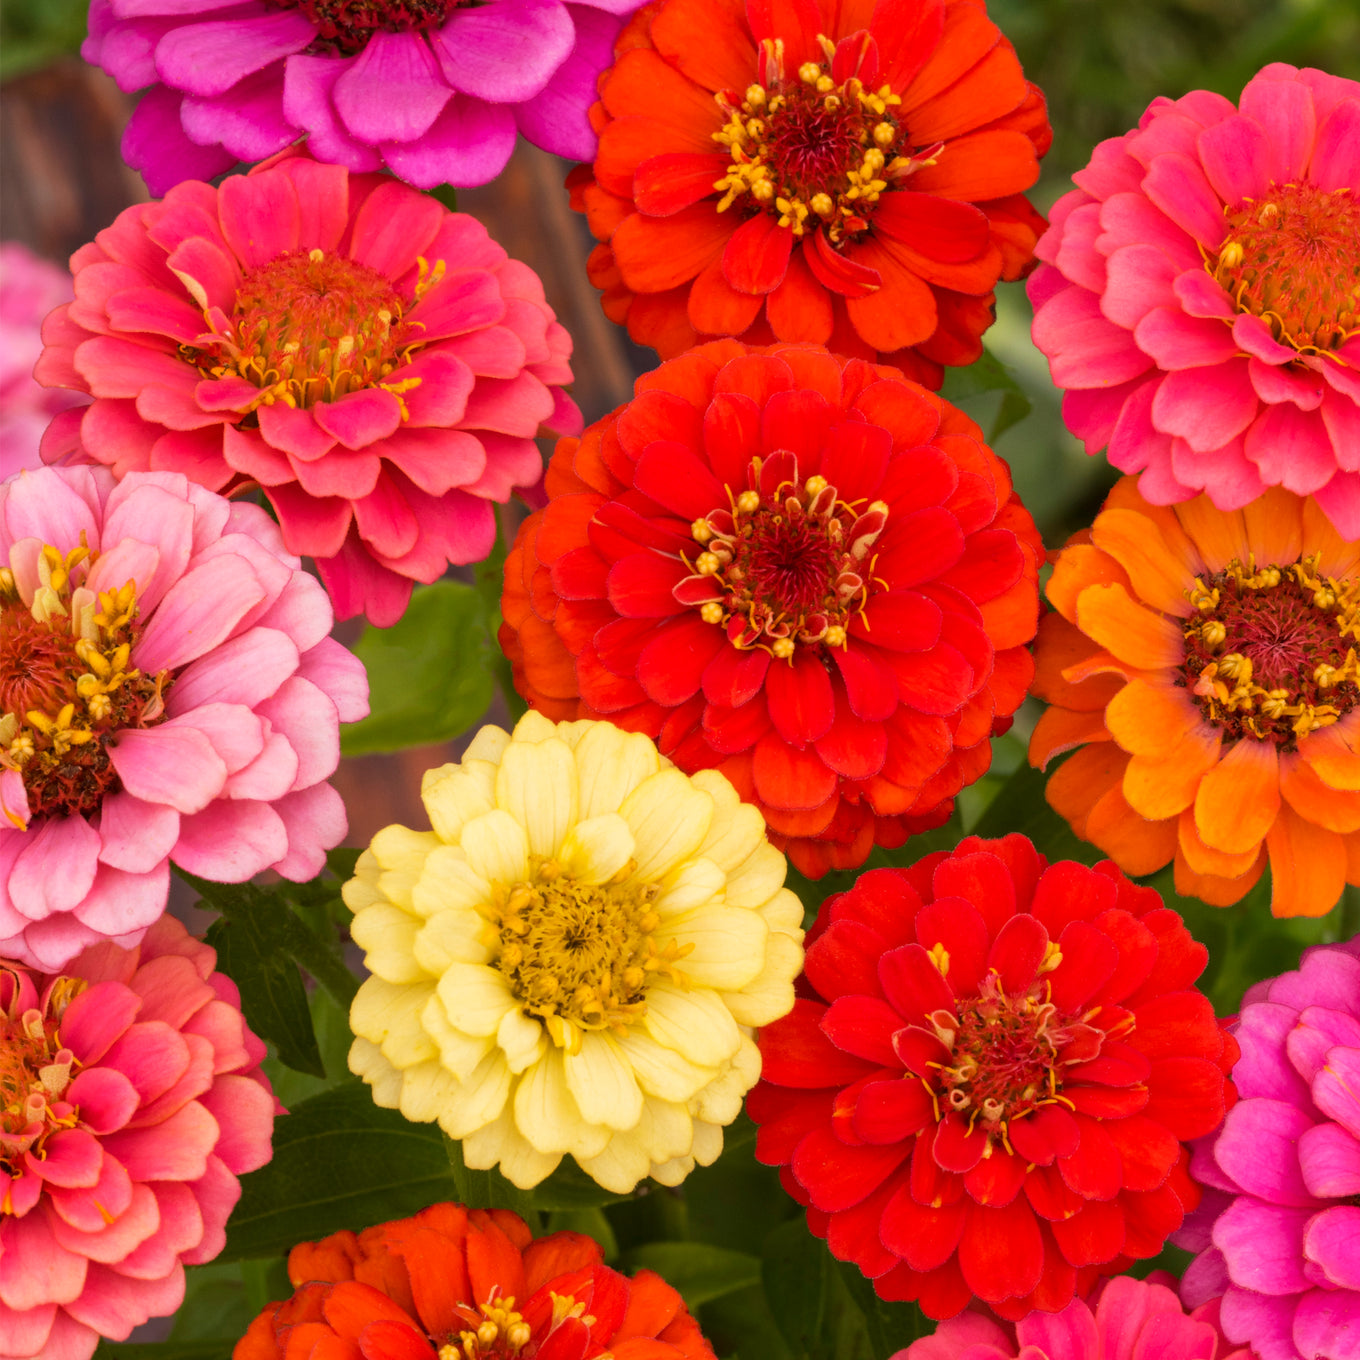 Thumbelina Dwarf Mixed Colors Zinnia seeds, fully matured and blooming beautiful blooms of yellow, orange, red, and pinks.